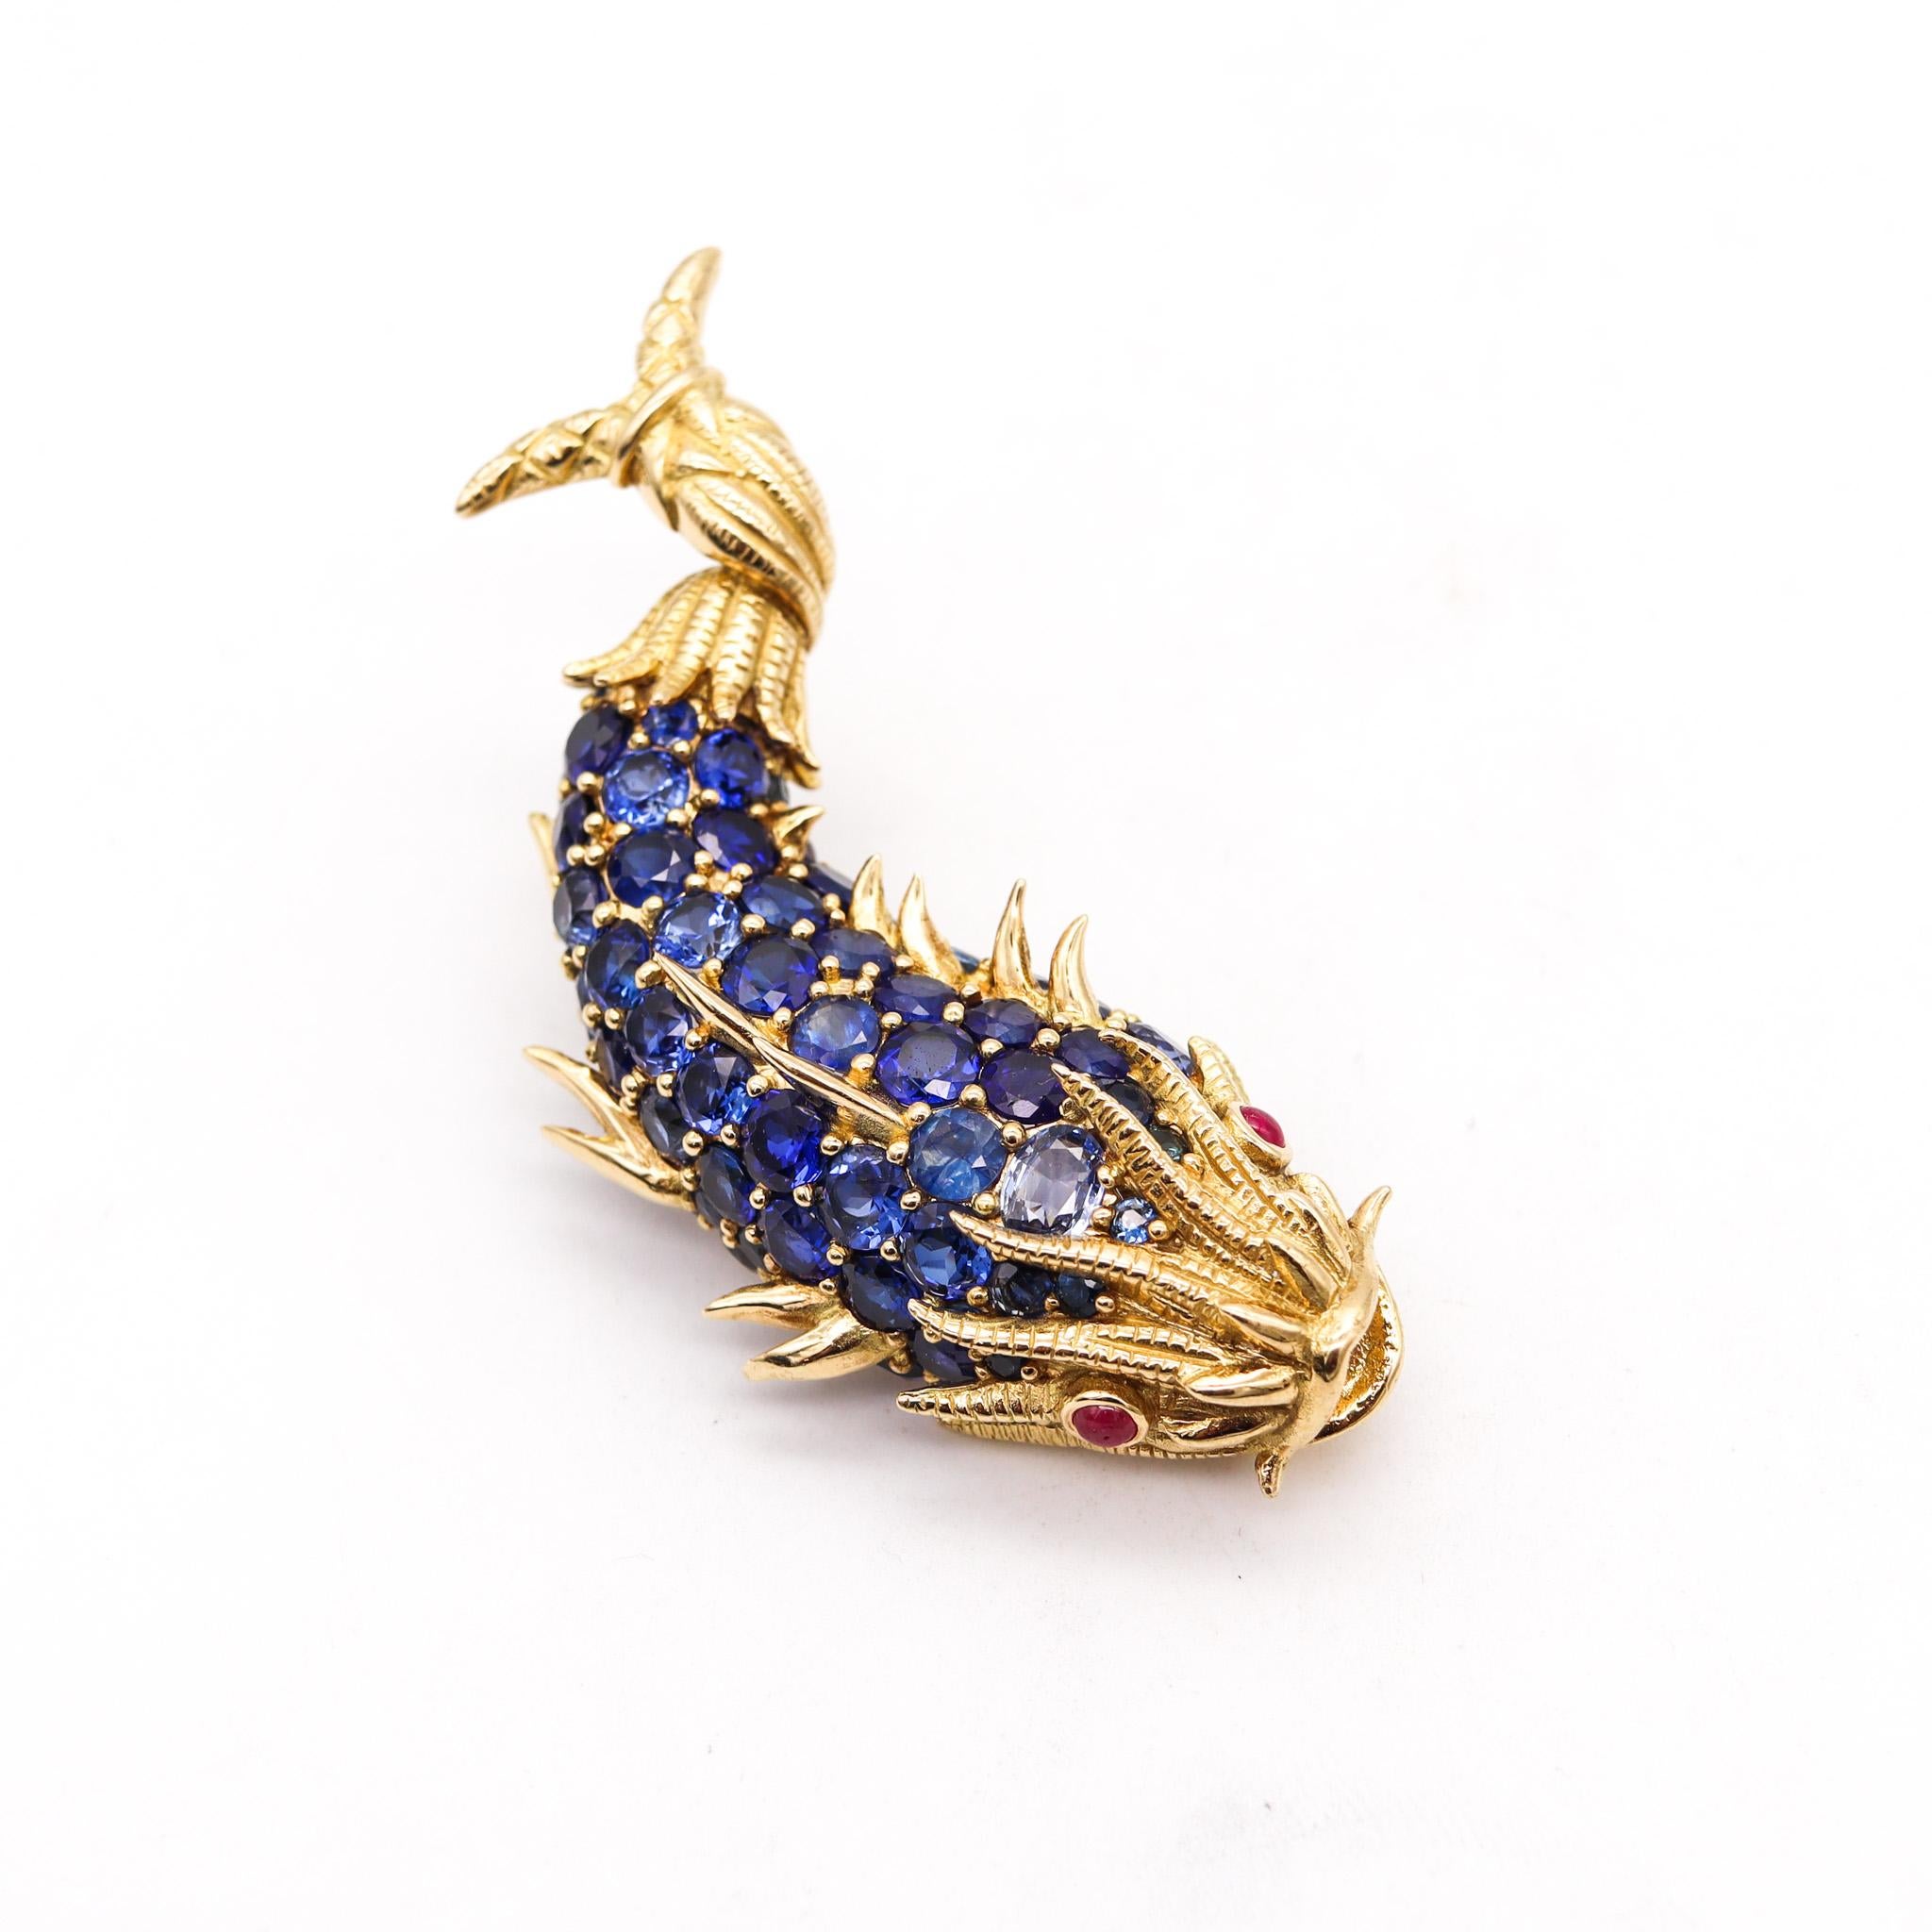 Mythological fish brooch designed by Tiffany & Co.

Fabulous iconic piece, created at the Tiffany Studios during the modernist period, back in the 1960's. This brooch has been meticulously crafted in the shape of a mythological fish in solid yellow